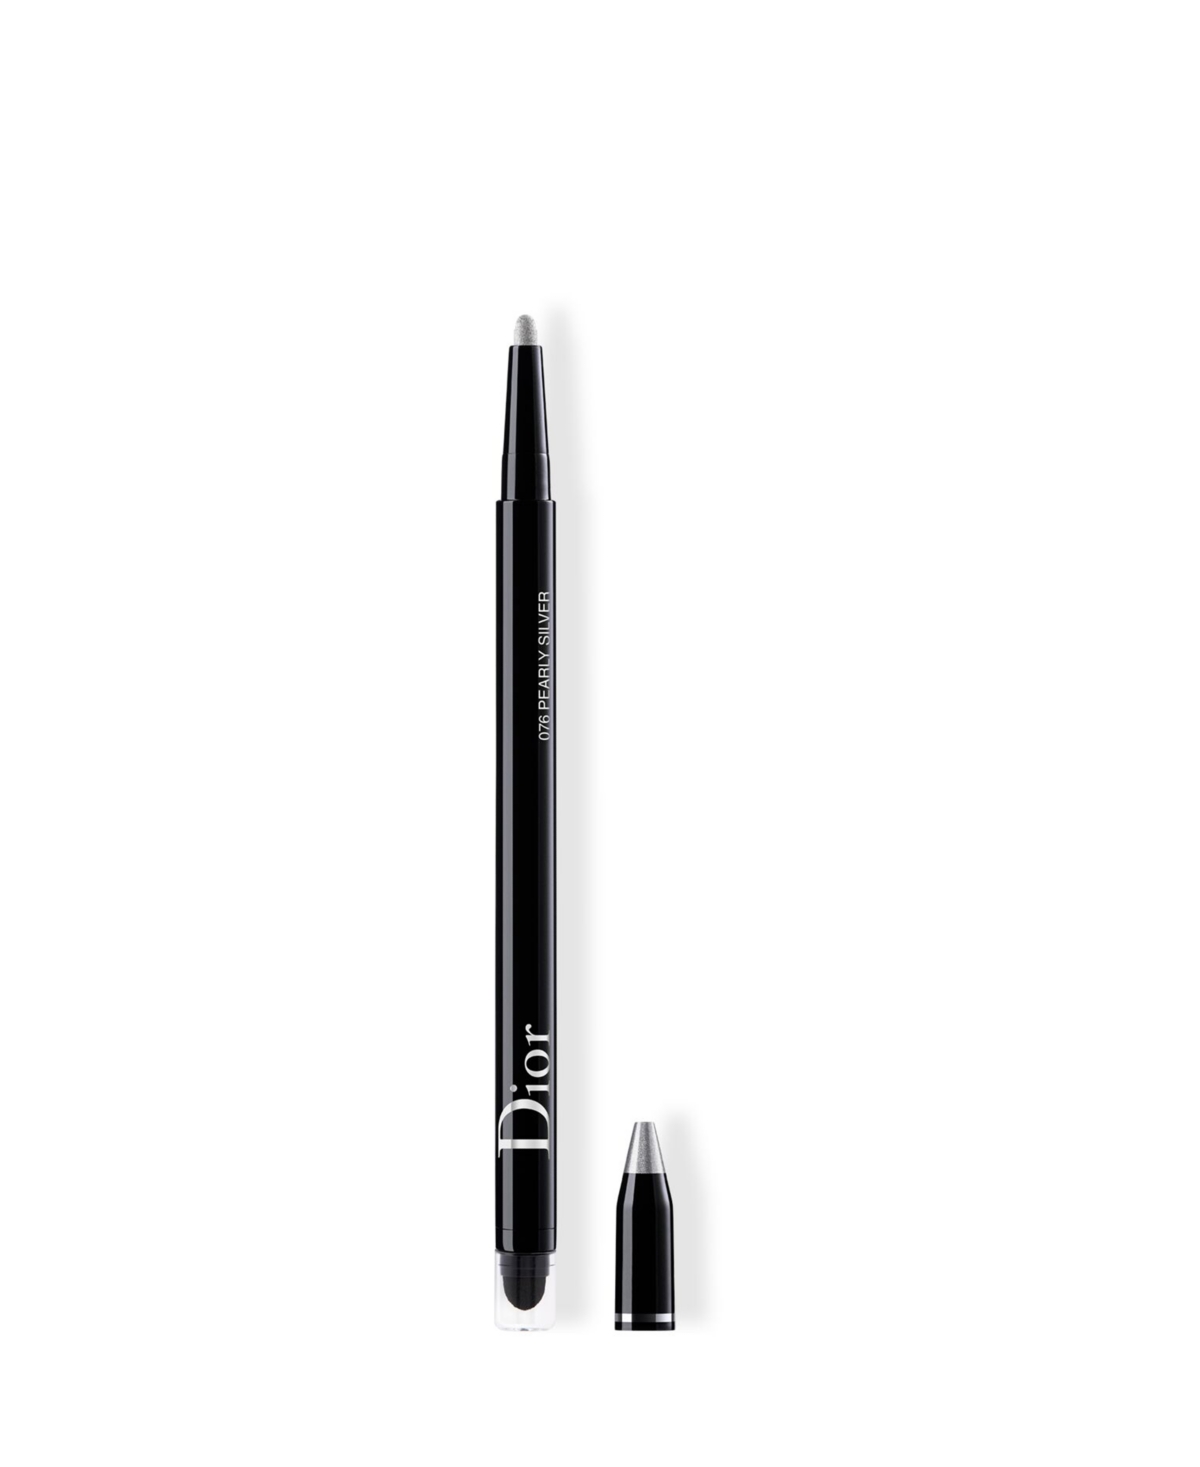 Dior Show 24h Stylo Waterproof Eyeliner In Pearly Silver